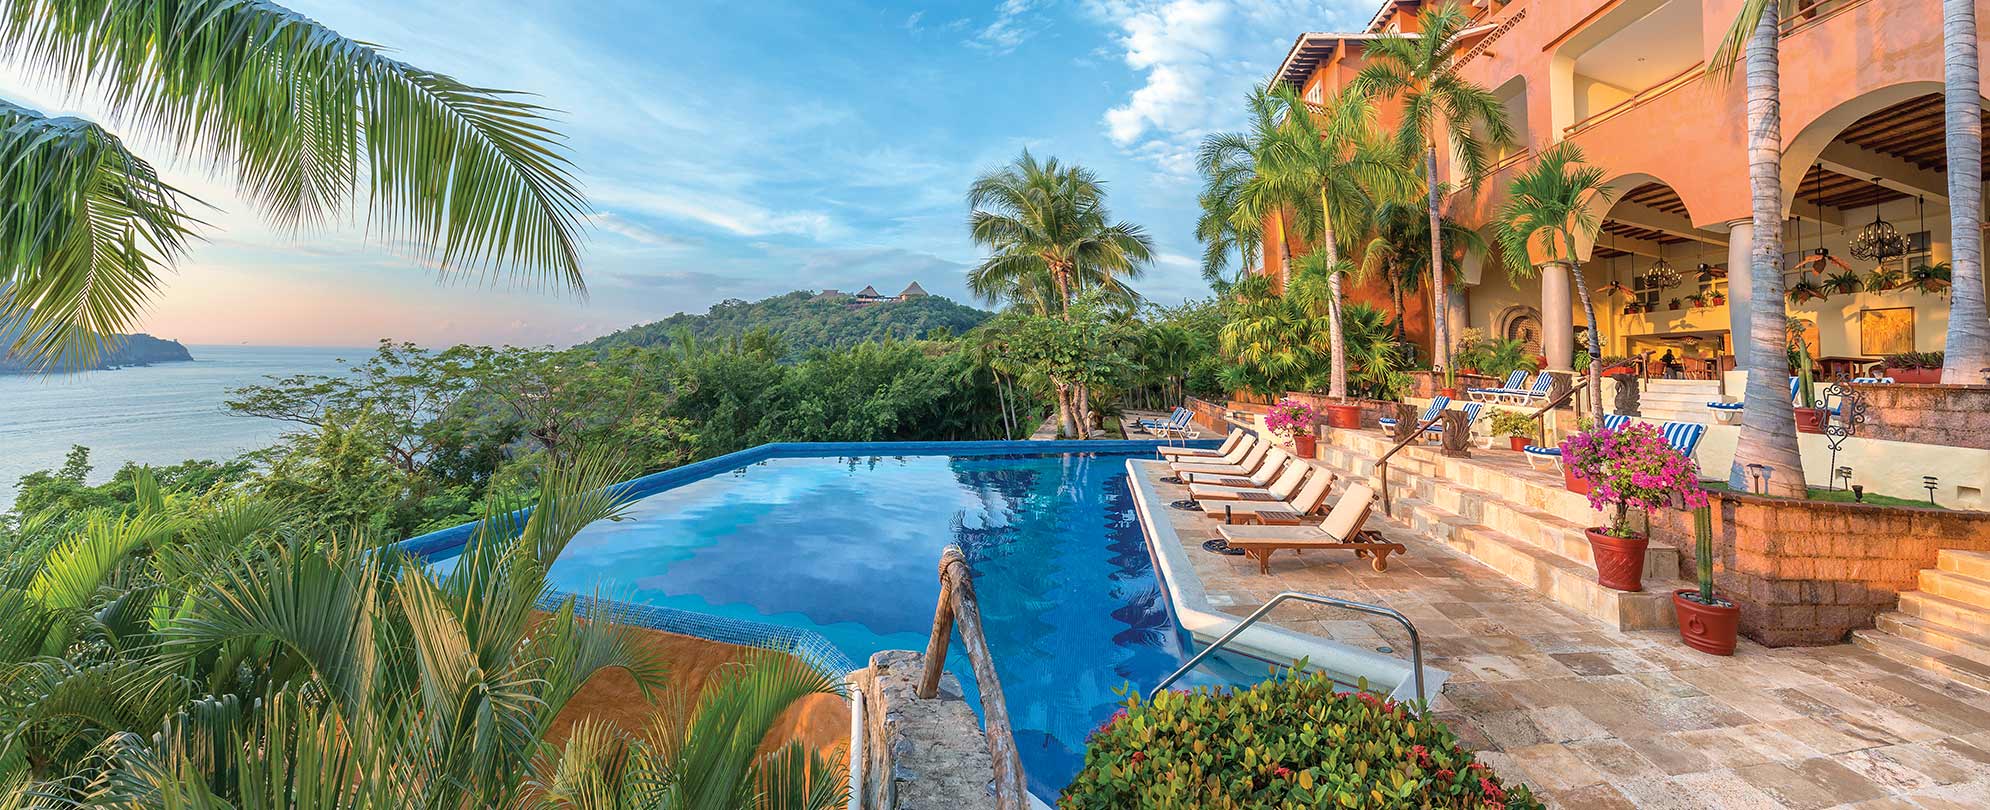 Worldmark resort pool with view of the ocean and mountains surrounded by tropical plants in Zihuatanejo, Mexico.